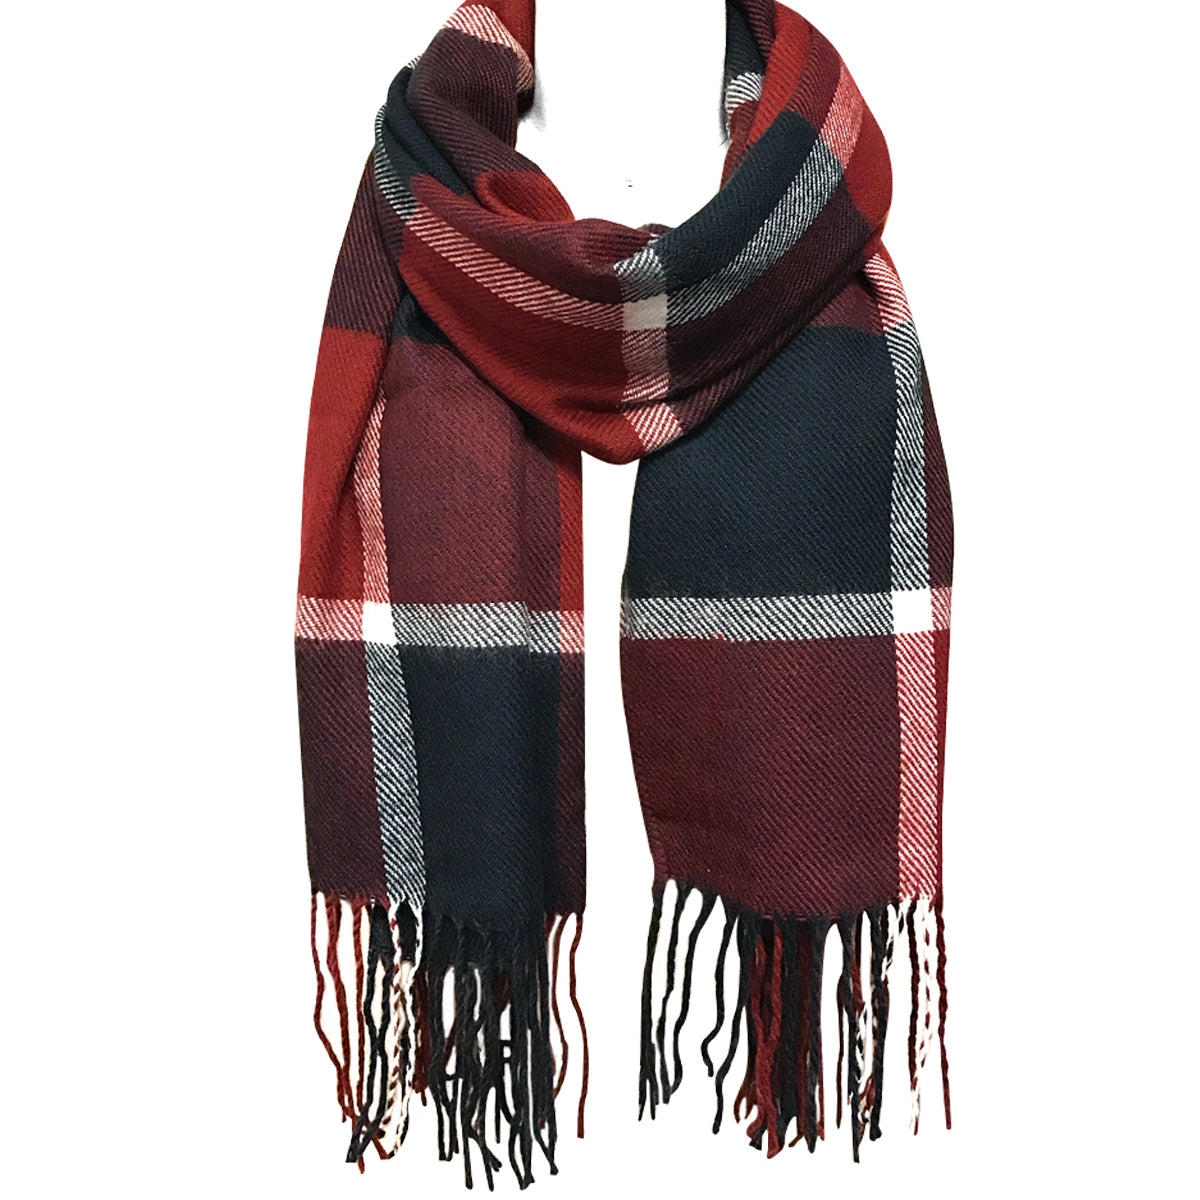 Wrapables Plaid Long Scarf Wrap with Fringe